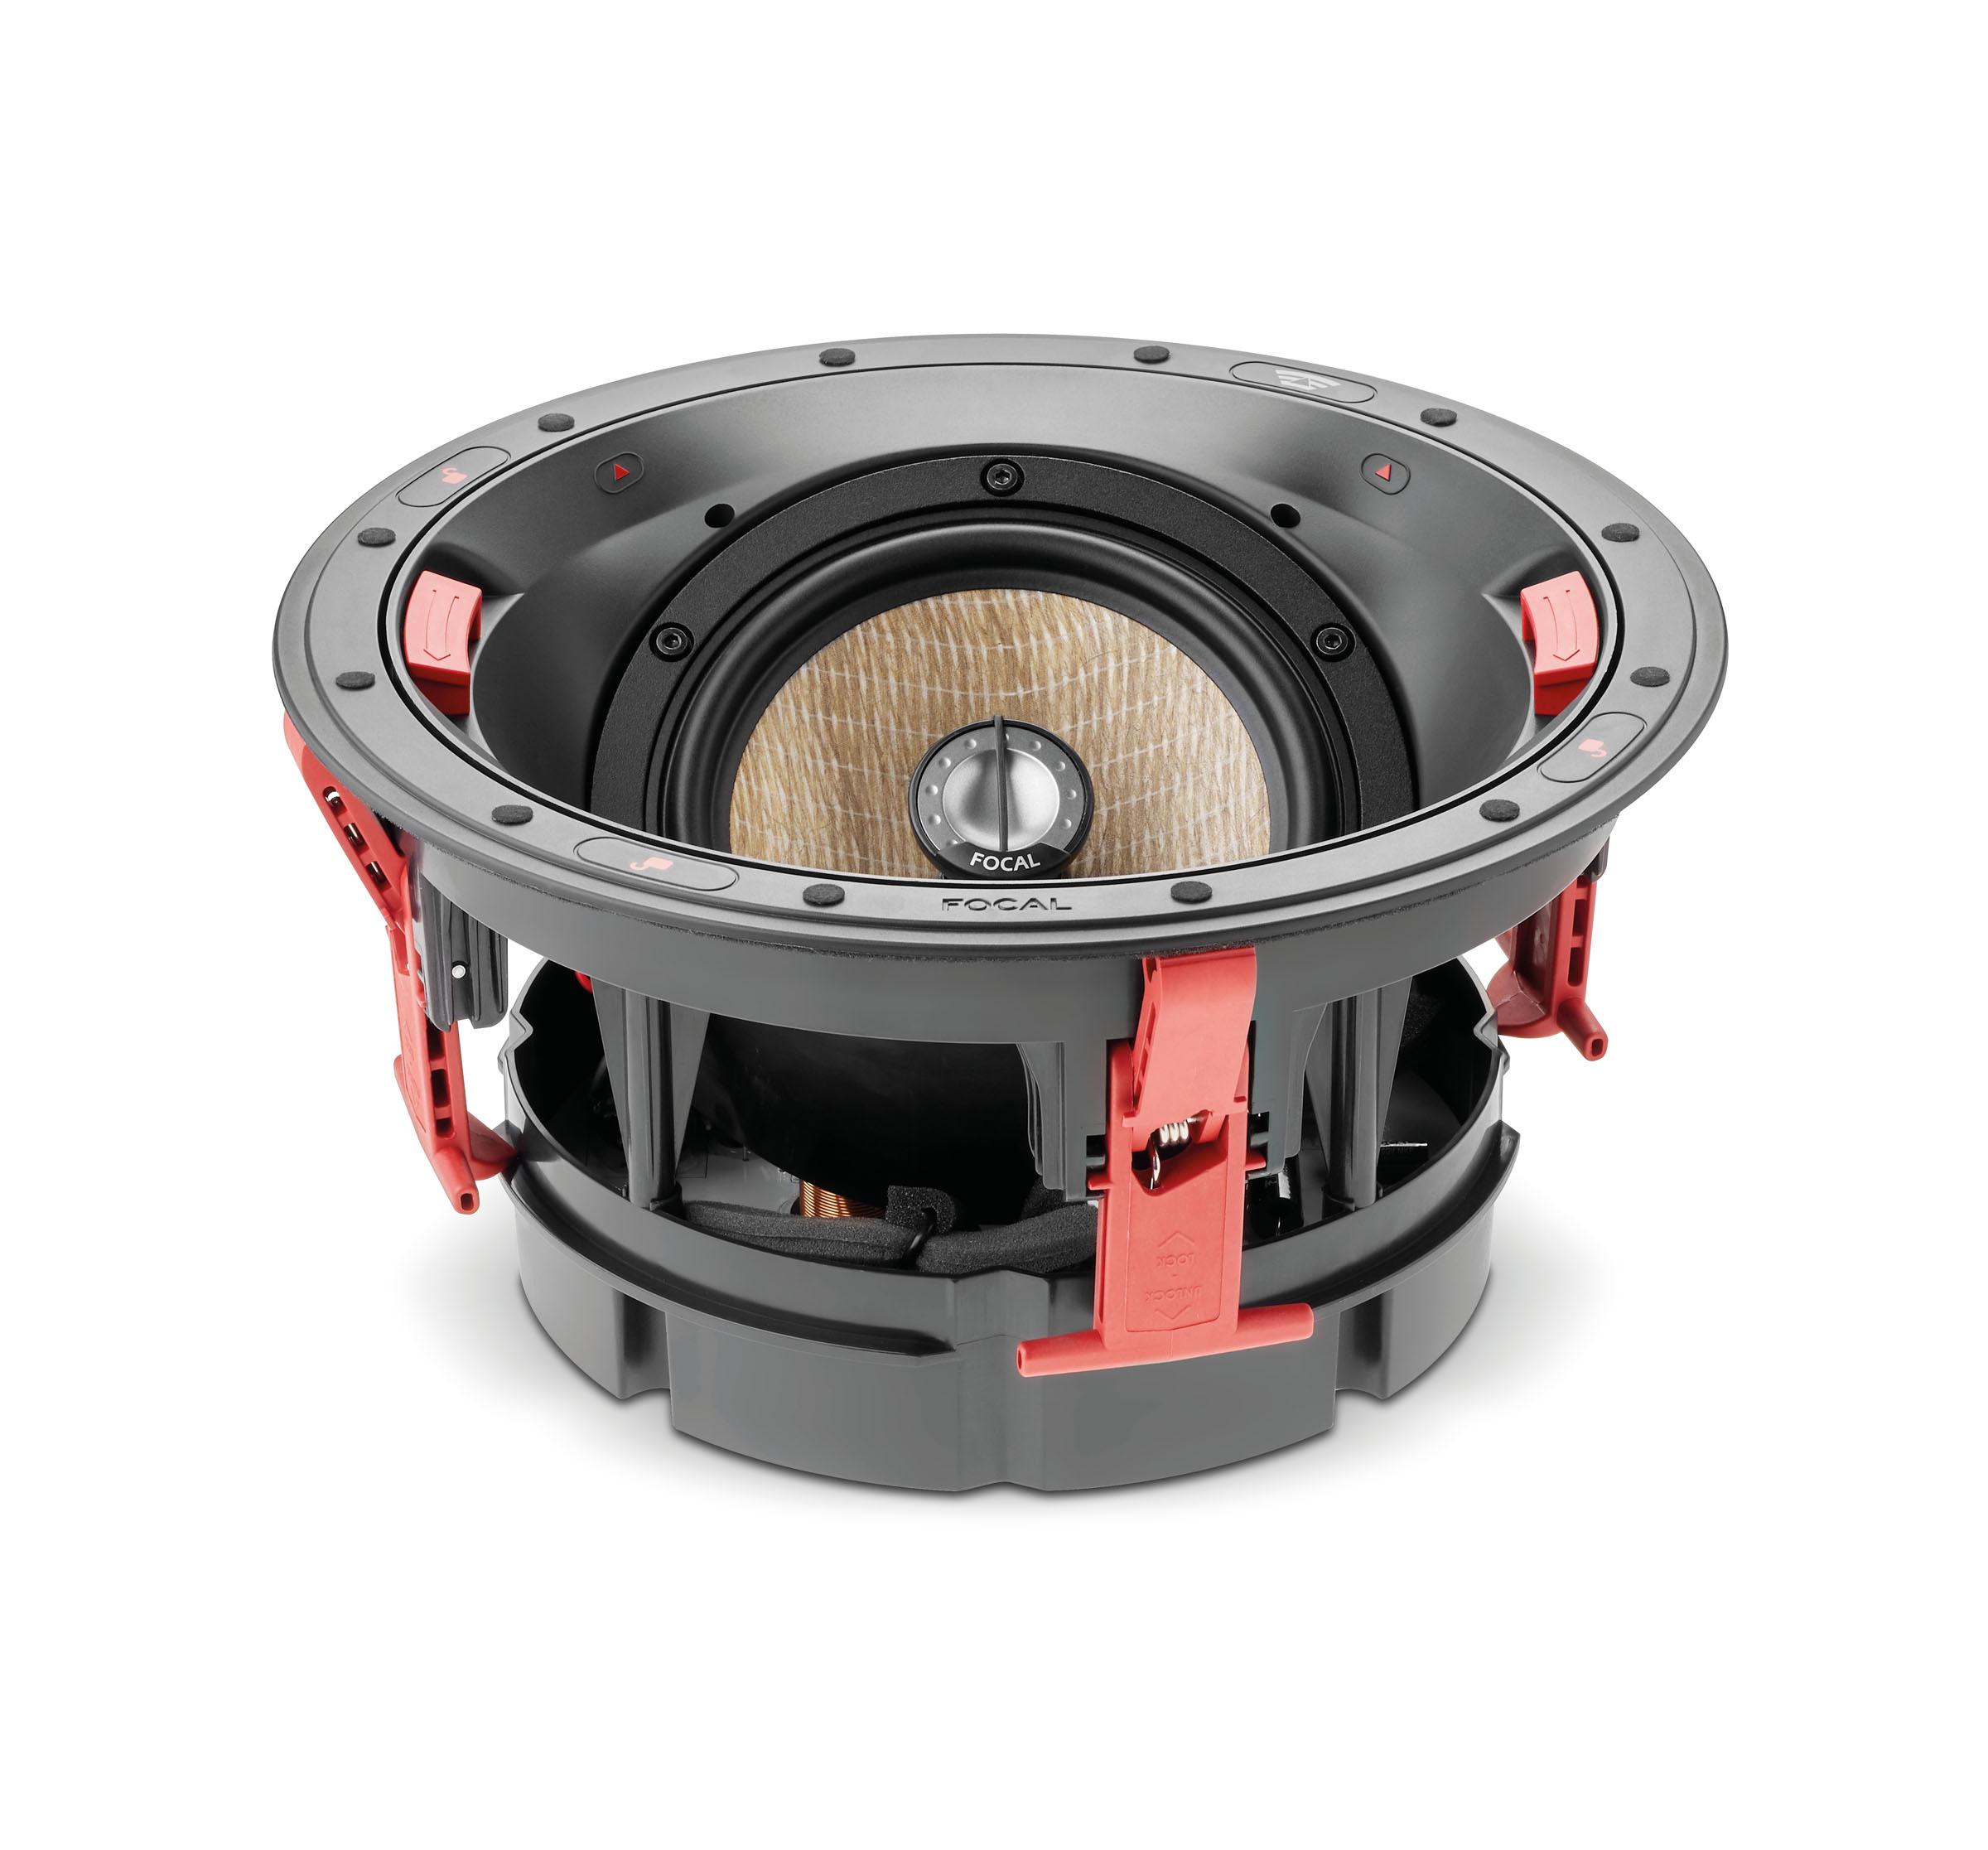 The latest in-ceiling from Focal has the perfect angle to immerse you in 3D sound c786d534 300 ica6 34